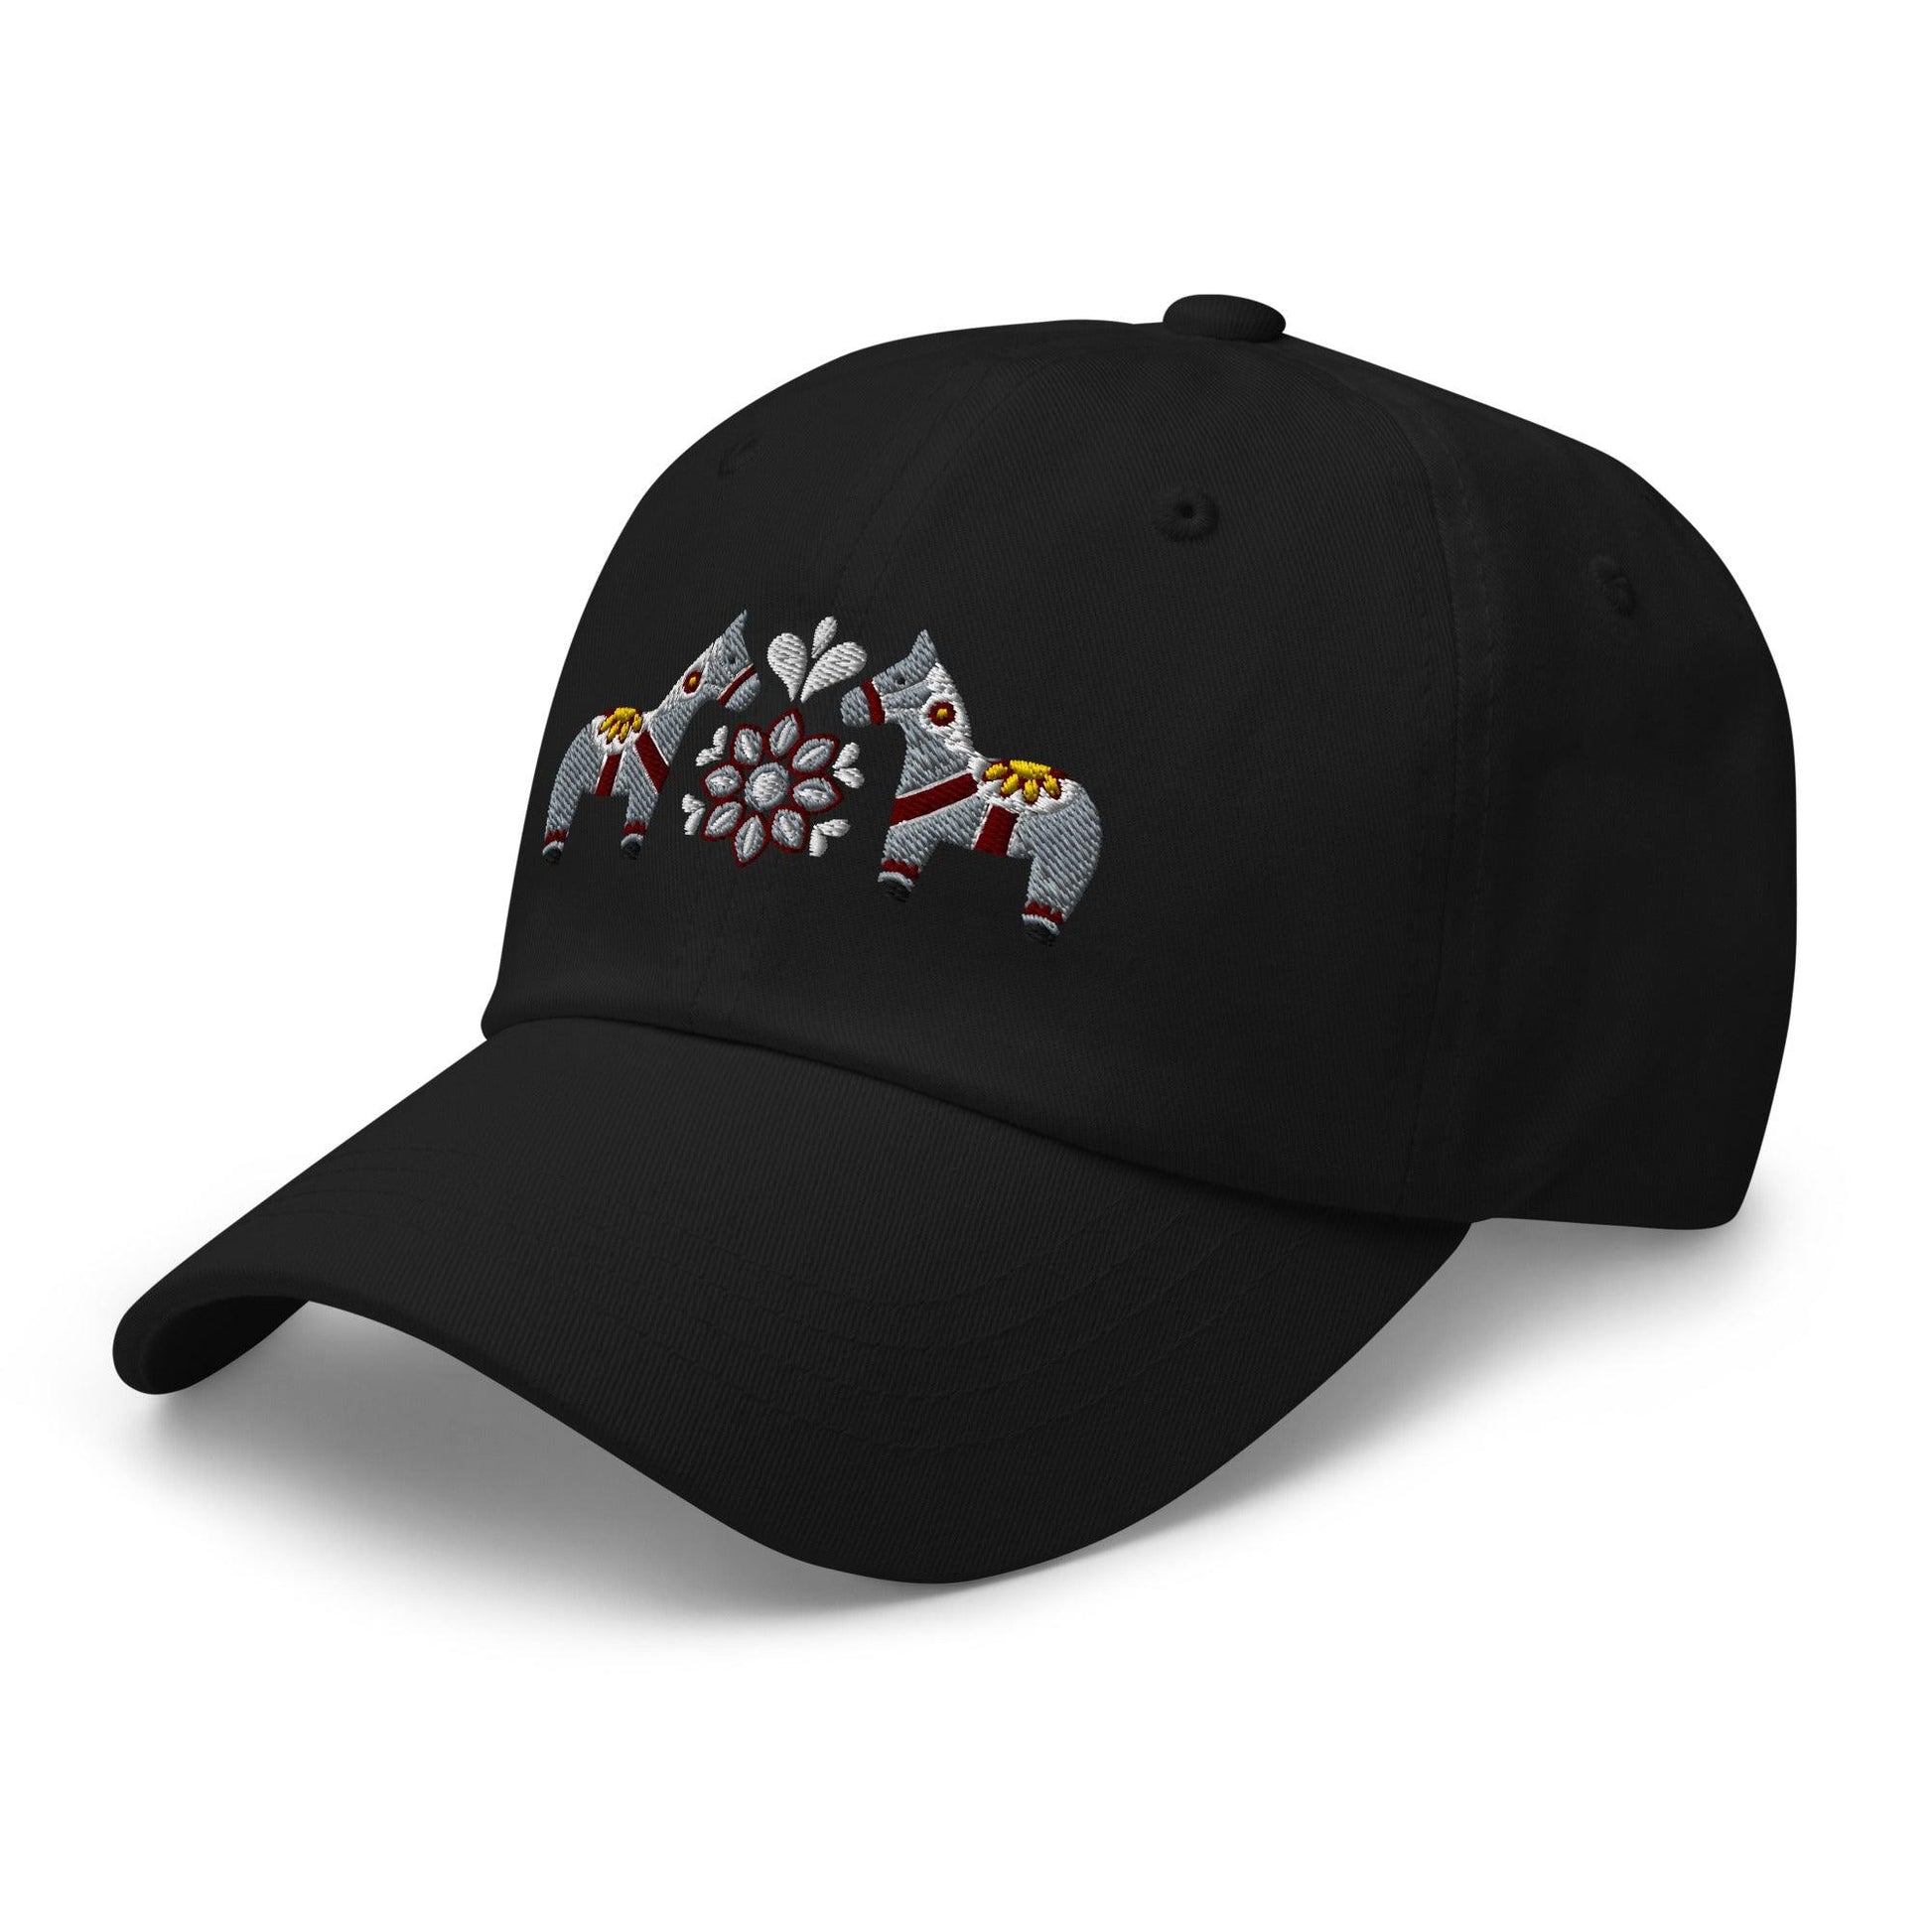 Swedish Dala Horse Embroidered Dad Hat - Gray - The Global Wanderer